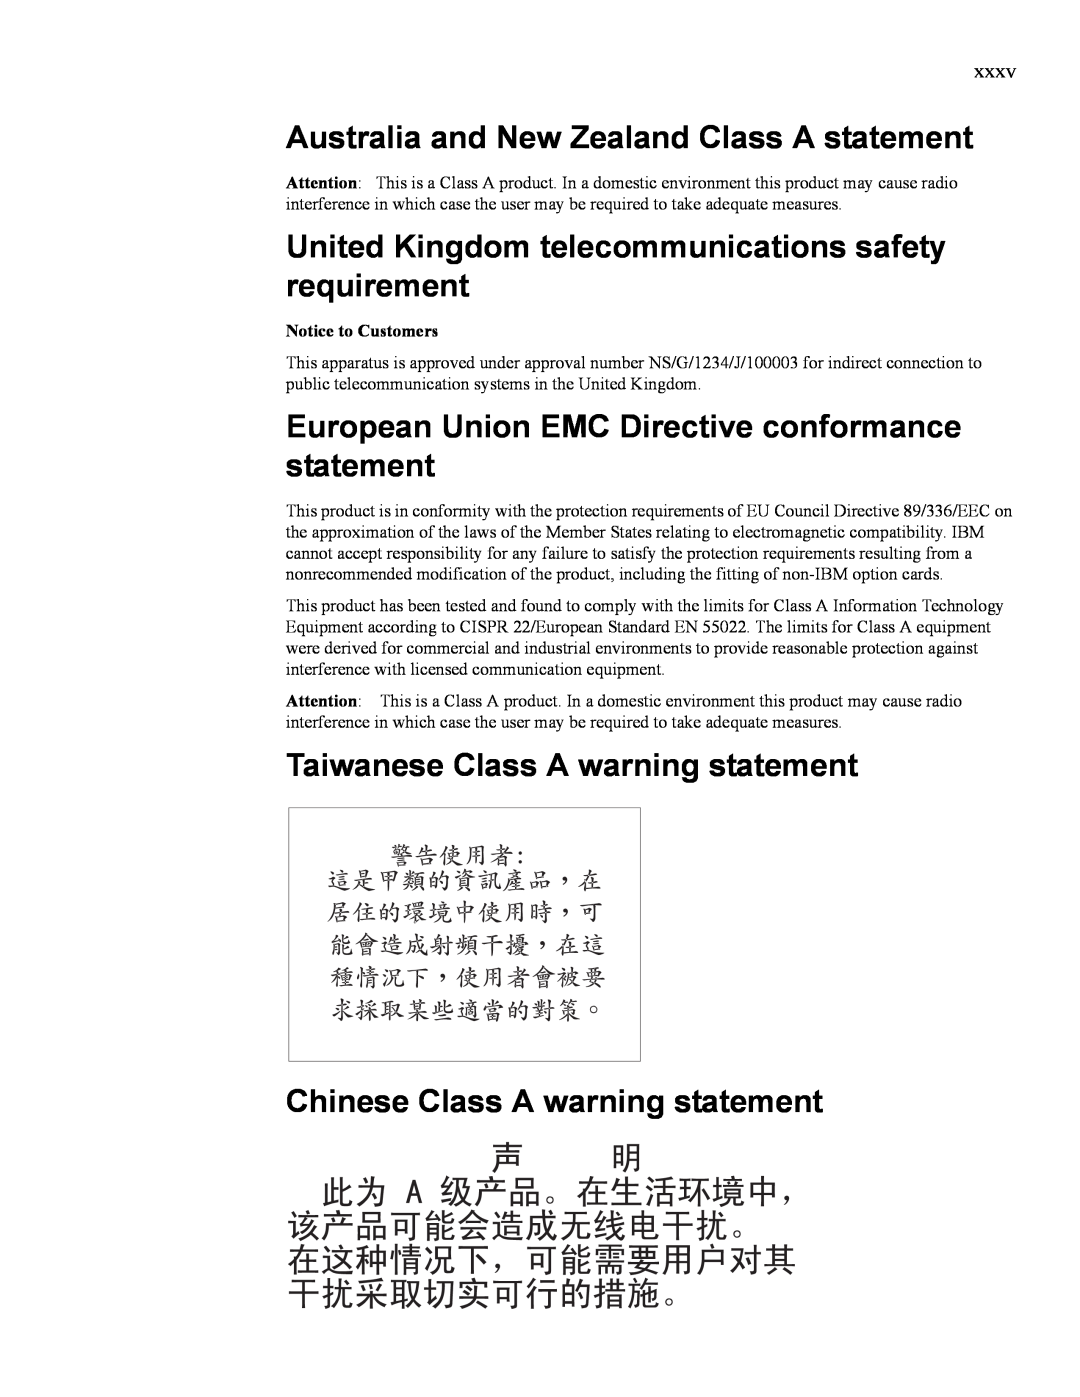 IBM 24R9718 IB manual Australia and New Zealand Class A statement, United Kingdom telecommunications safety requirement 